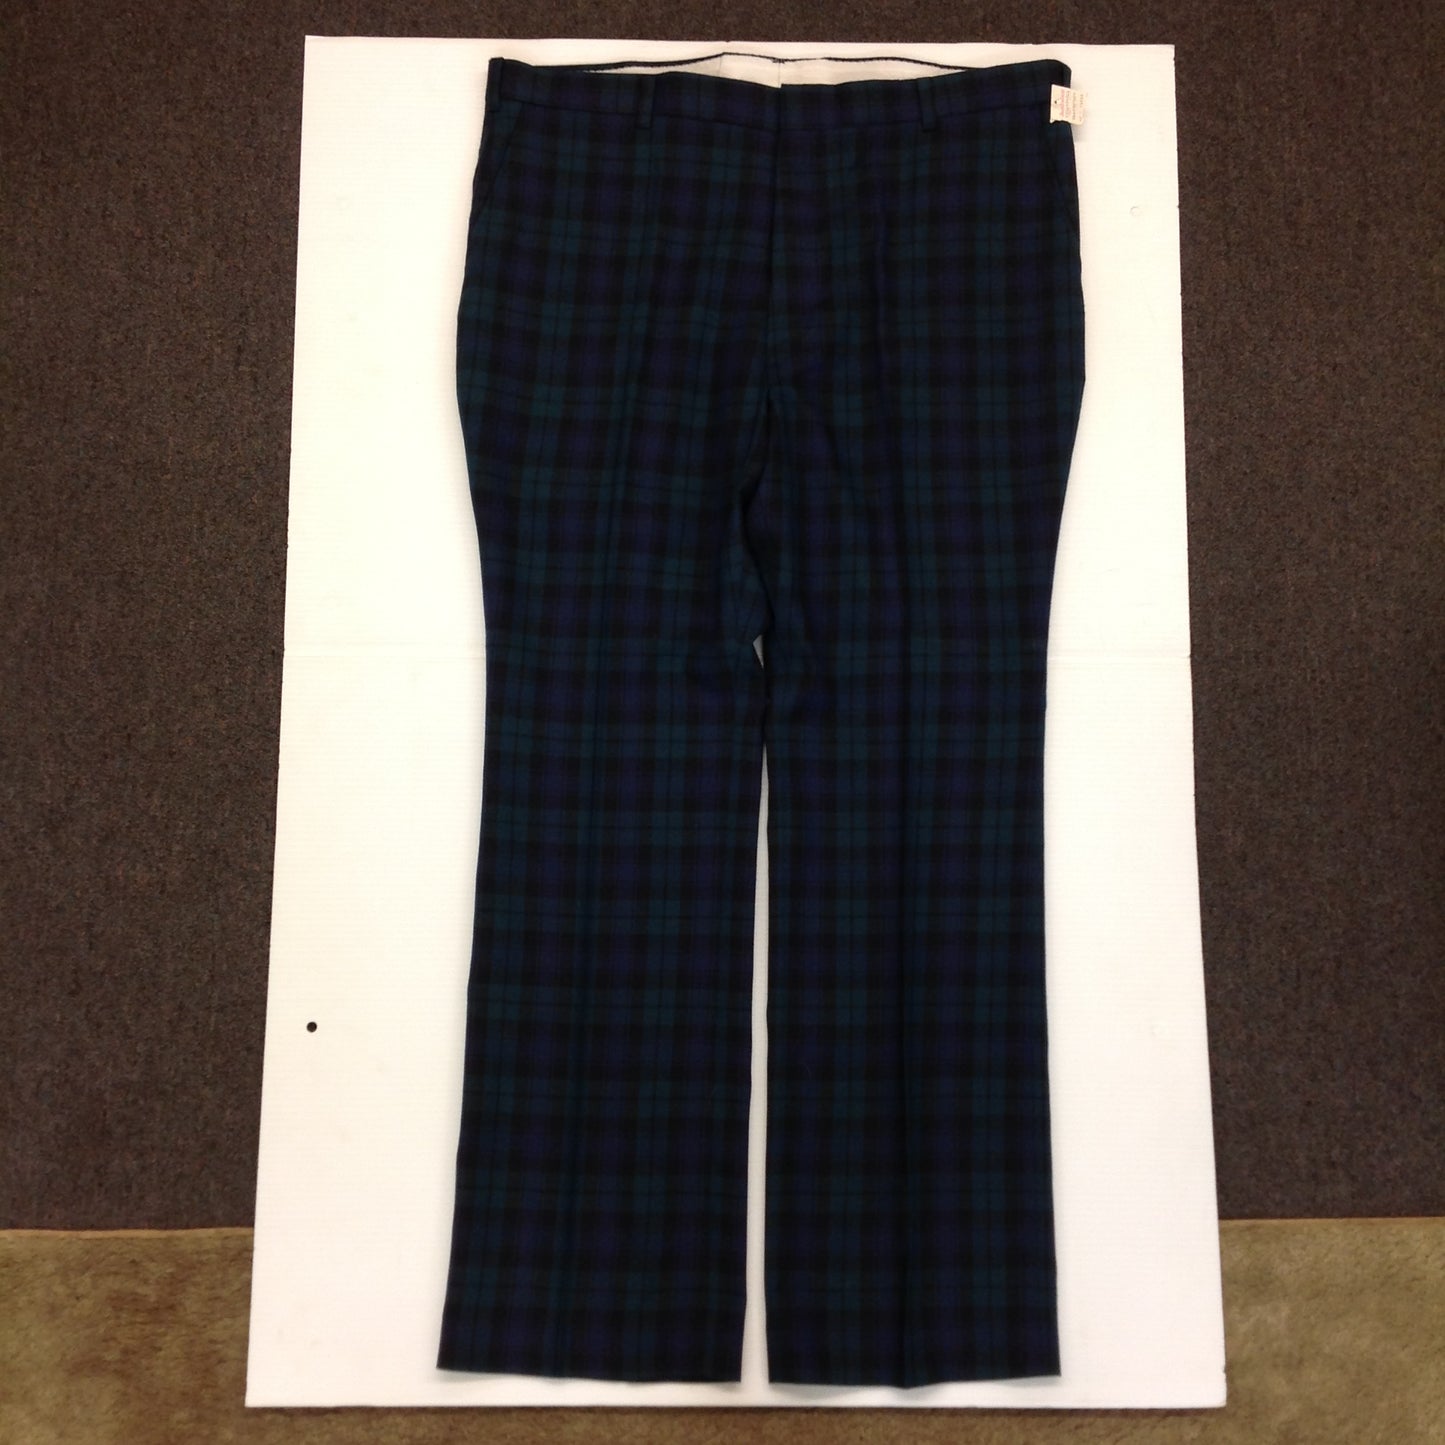 Vintage 2001 New with Tags Jacobson's of Detroit Plaid Tartan Golf Pants 42 x 32